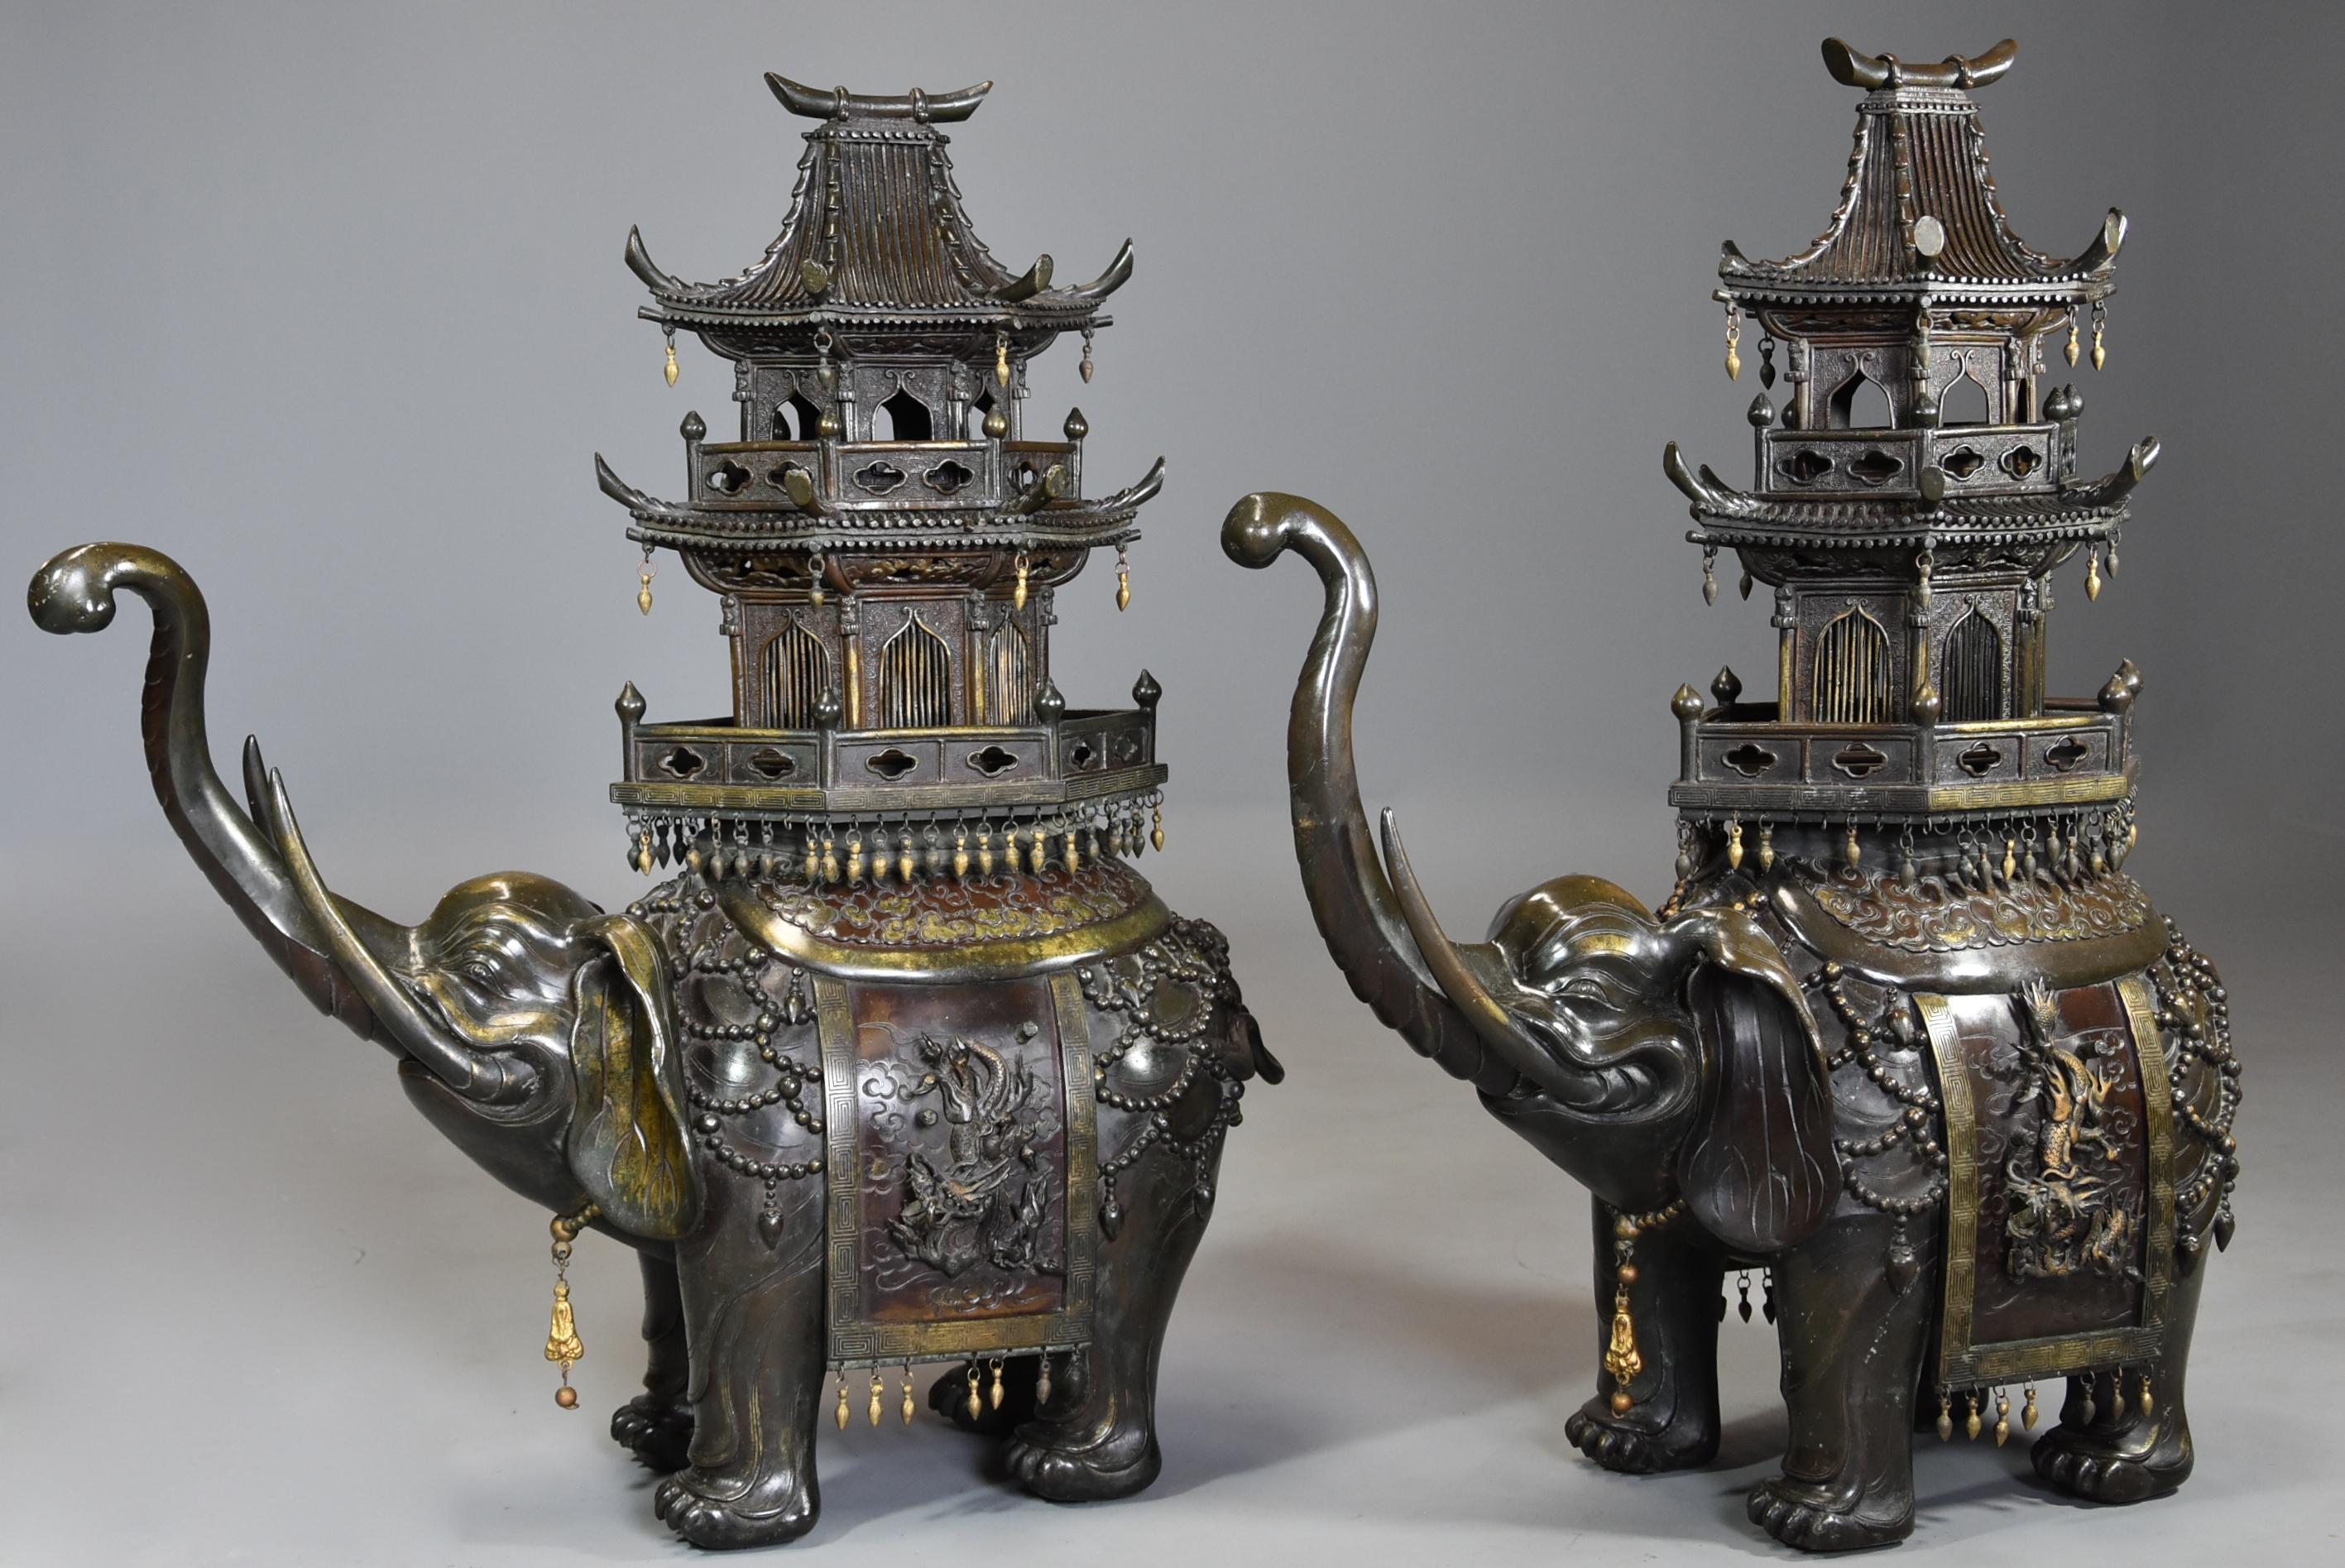 Pair of Large 19th Century Japanese Meiji Bronze Elephant Incense Burners For Sale 2